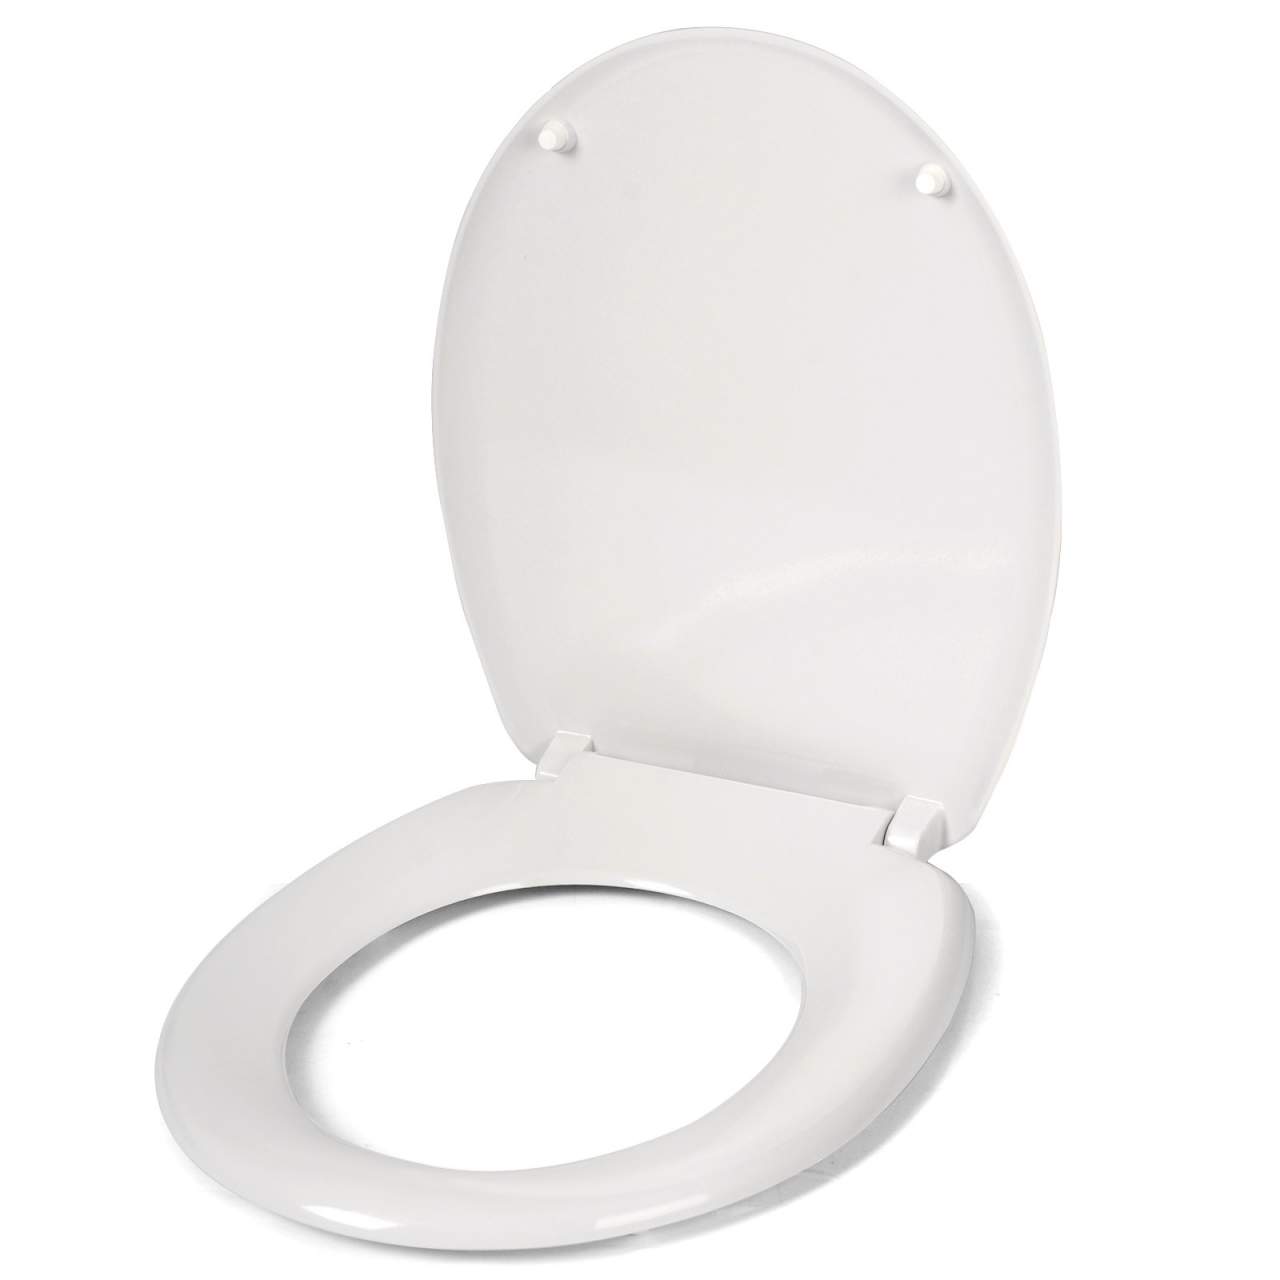 Soft Close Quick Release Top Fixing Hinges Heavy Duty UK Bathroom Toilet Seat 